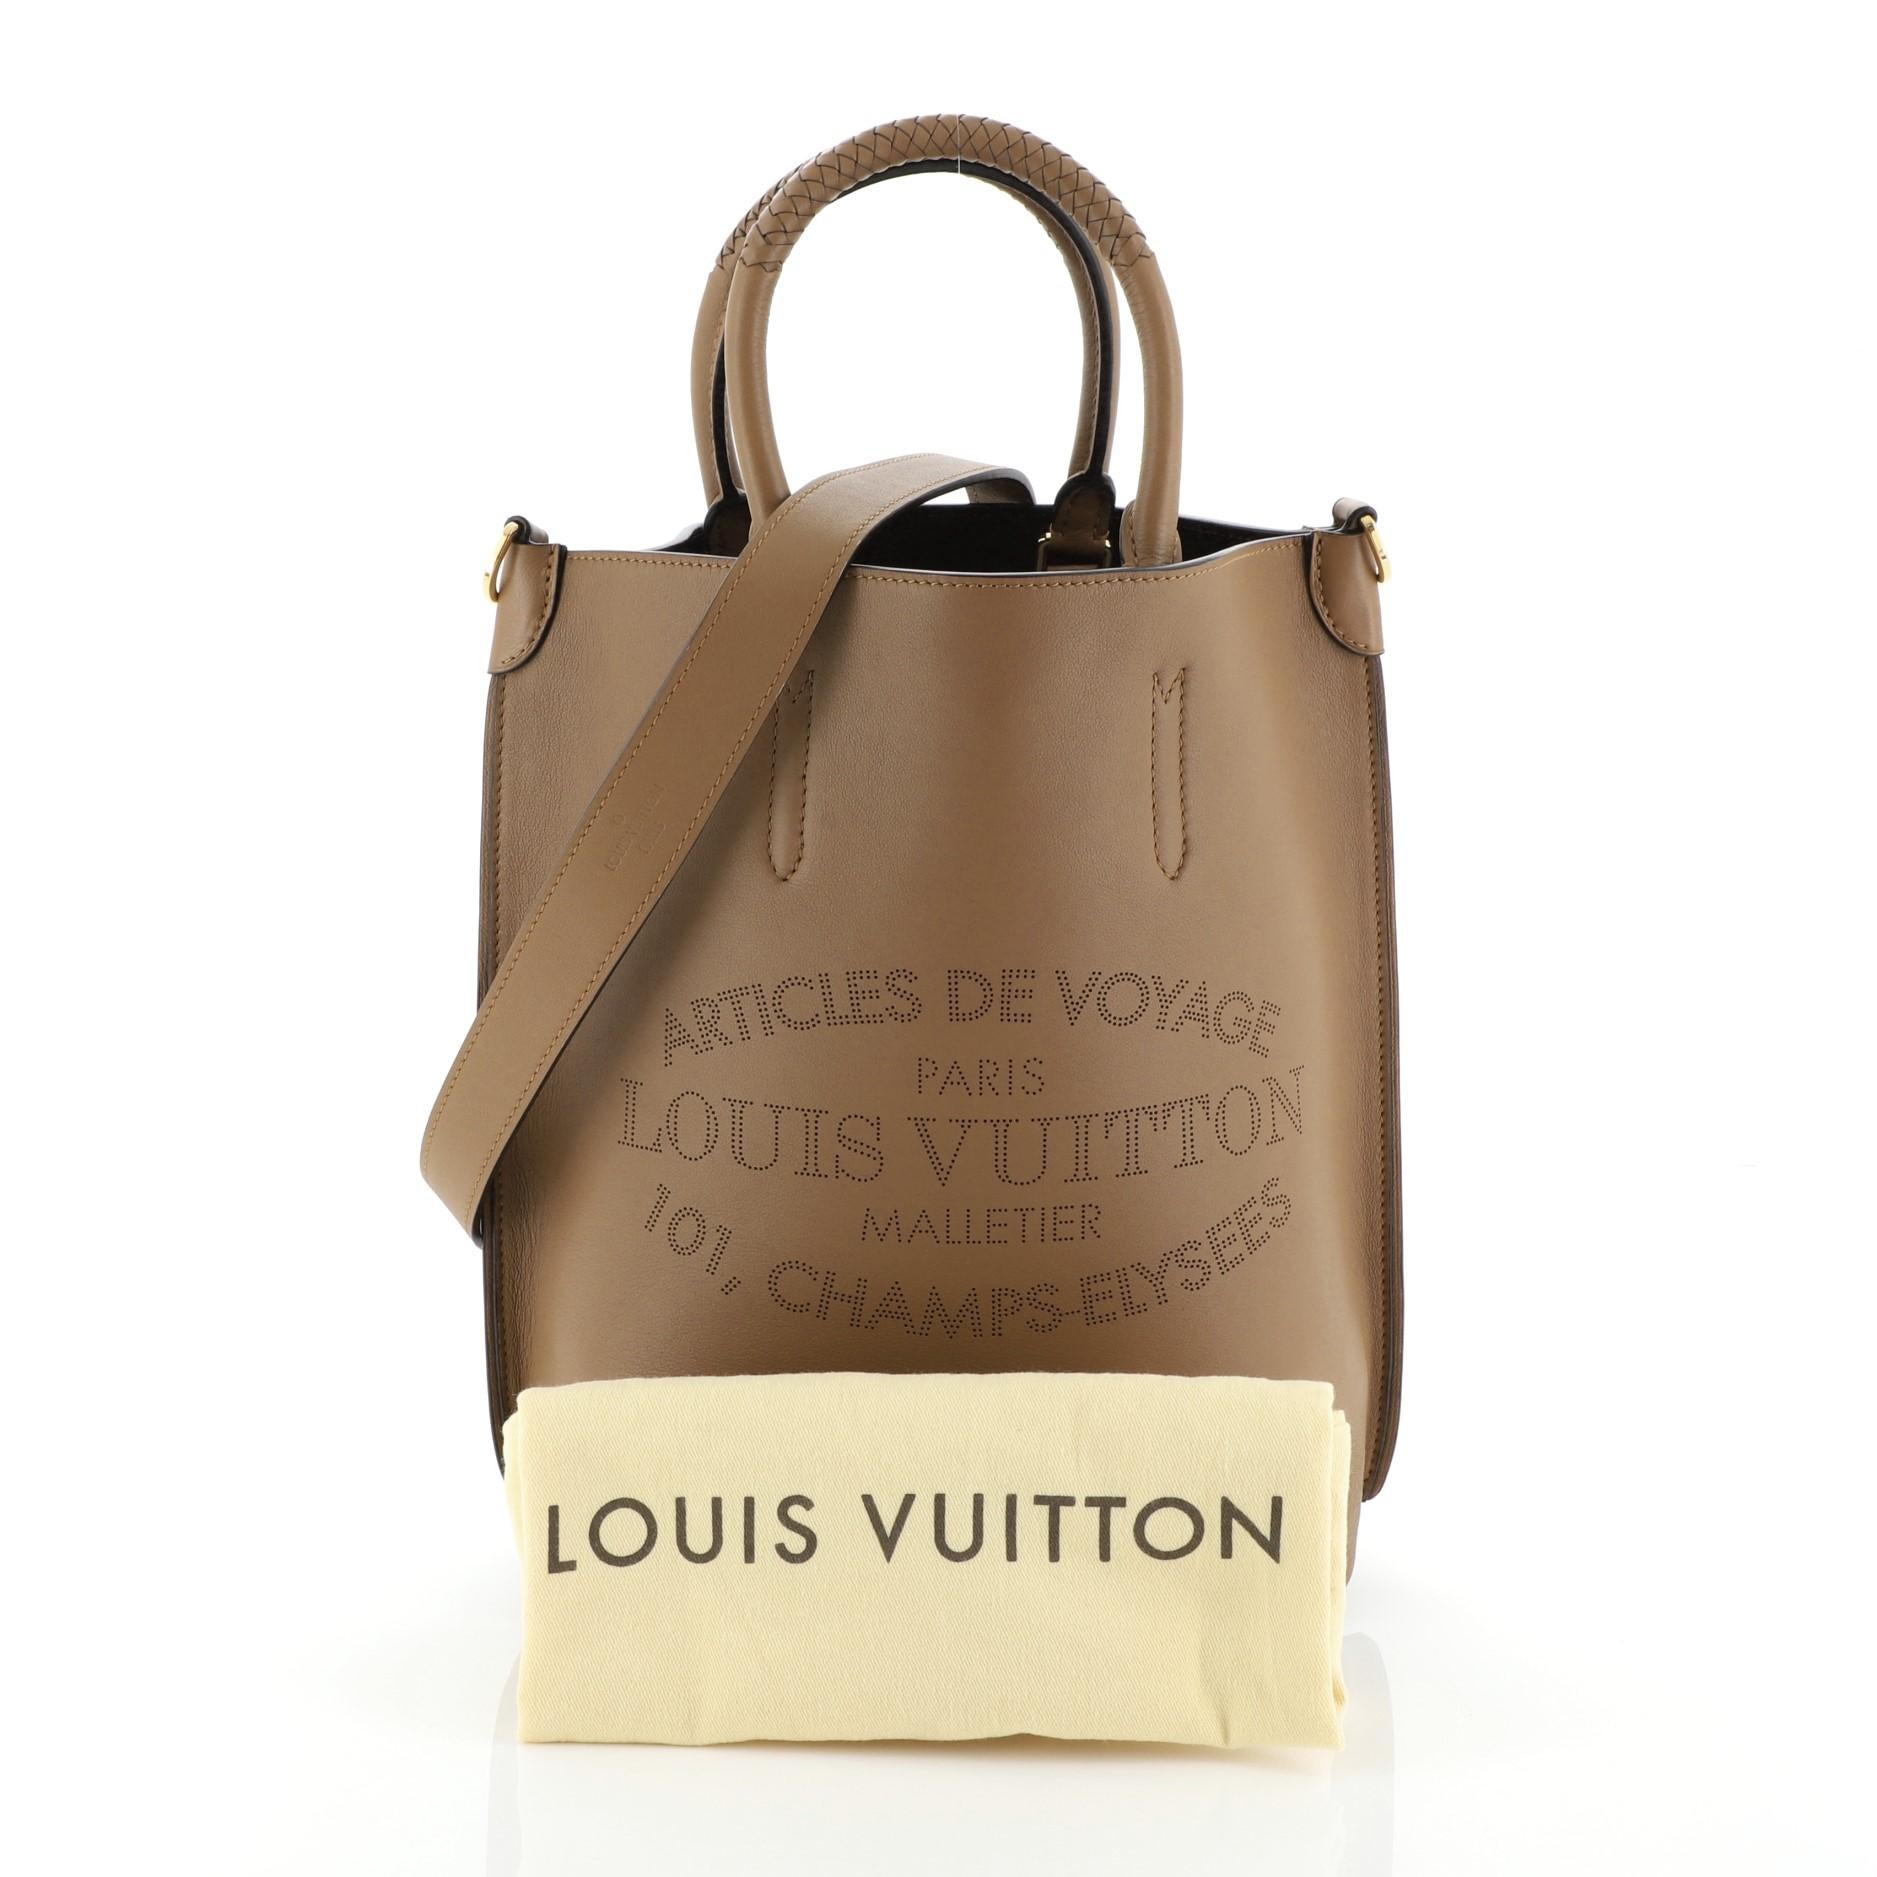 This Louis Vuitton Flore Handbag Leather MM, crafted from brown leather, features braided leather handles, heritage signature Articles de Voyage pinpoint perforated design and gold-tone hardware. Its claw clasp closure opens to a brown leather and